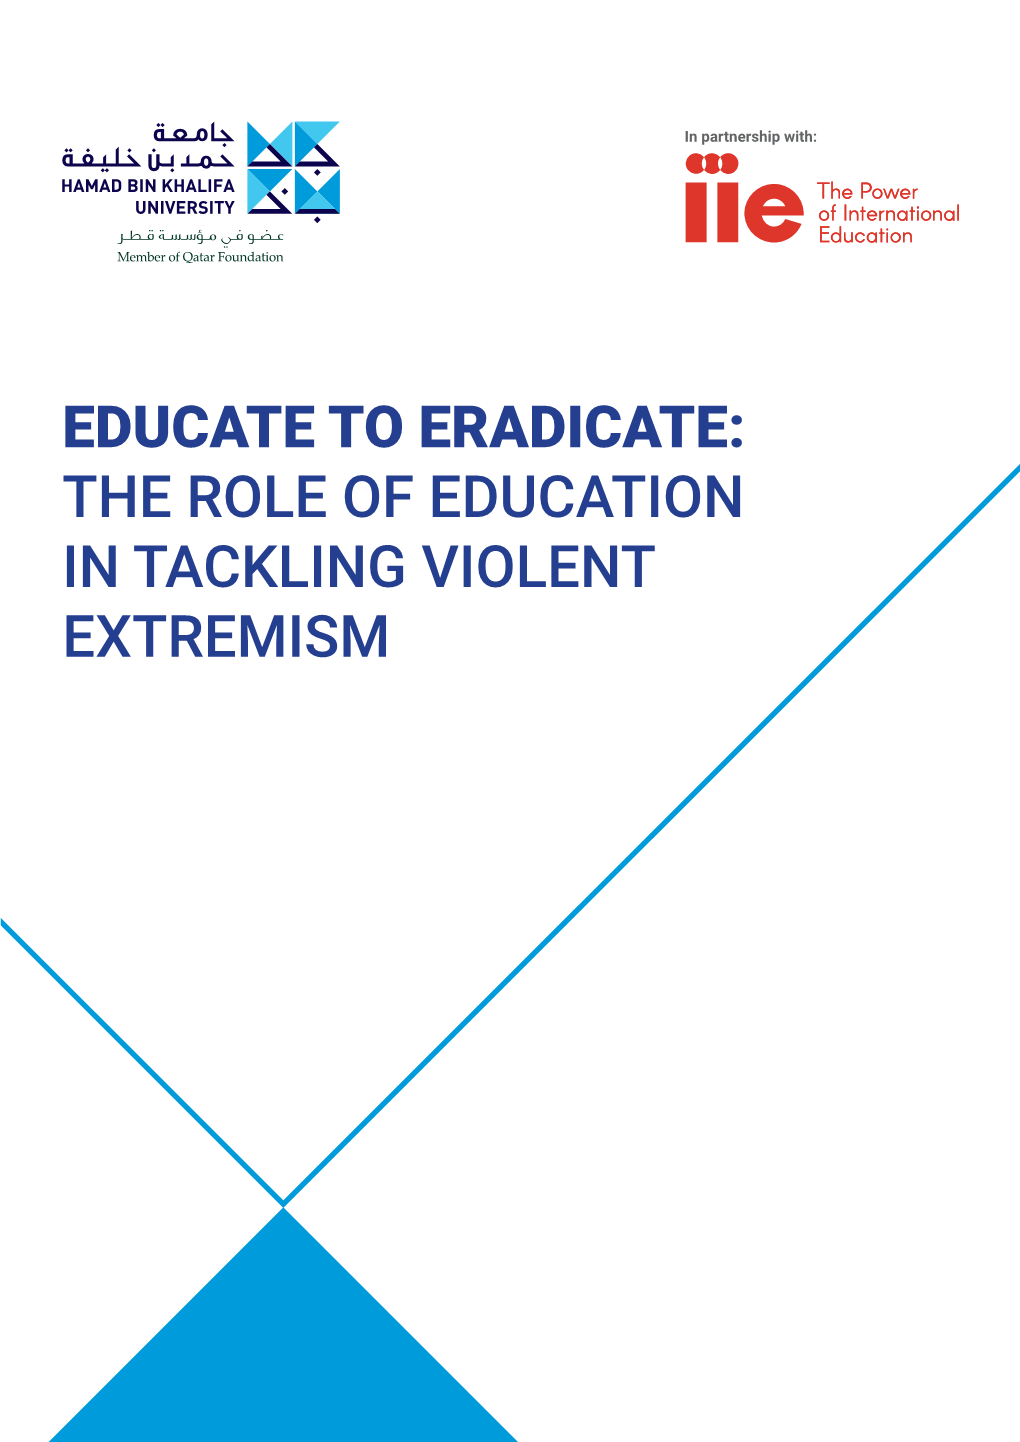 The Role of Education in Tackling Violent Extremism Agenda